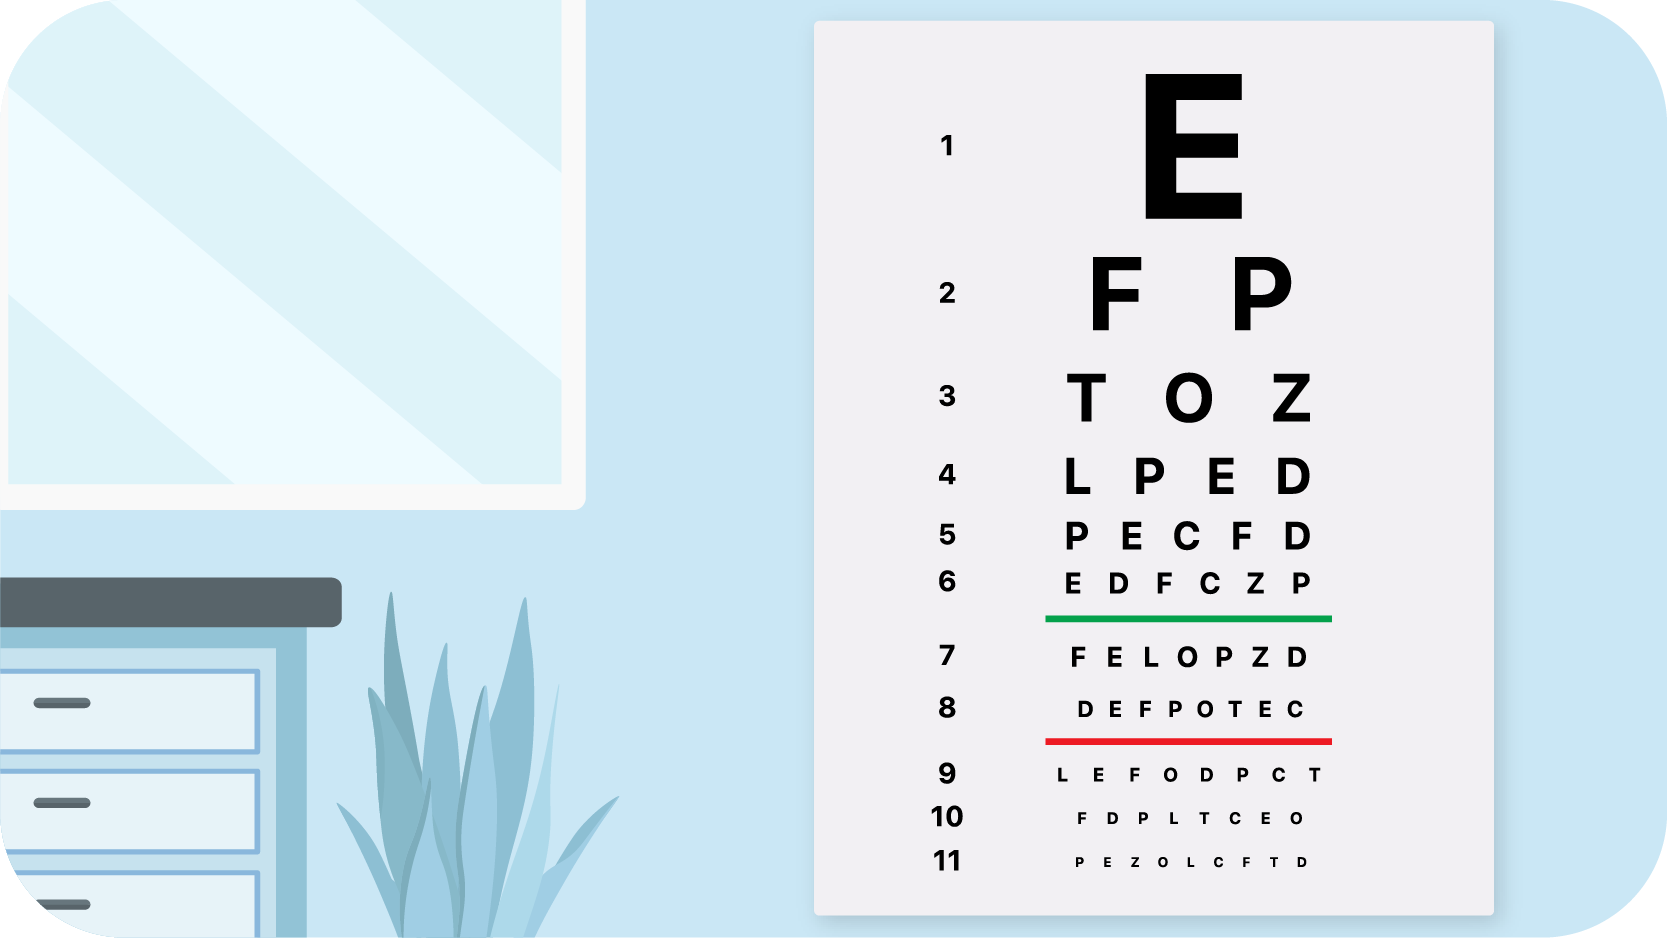 9 Types of Eye Tests That Are Part of a Healthy Eye Exam